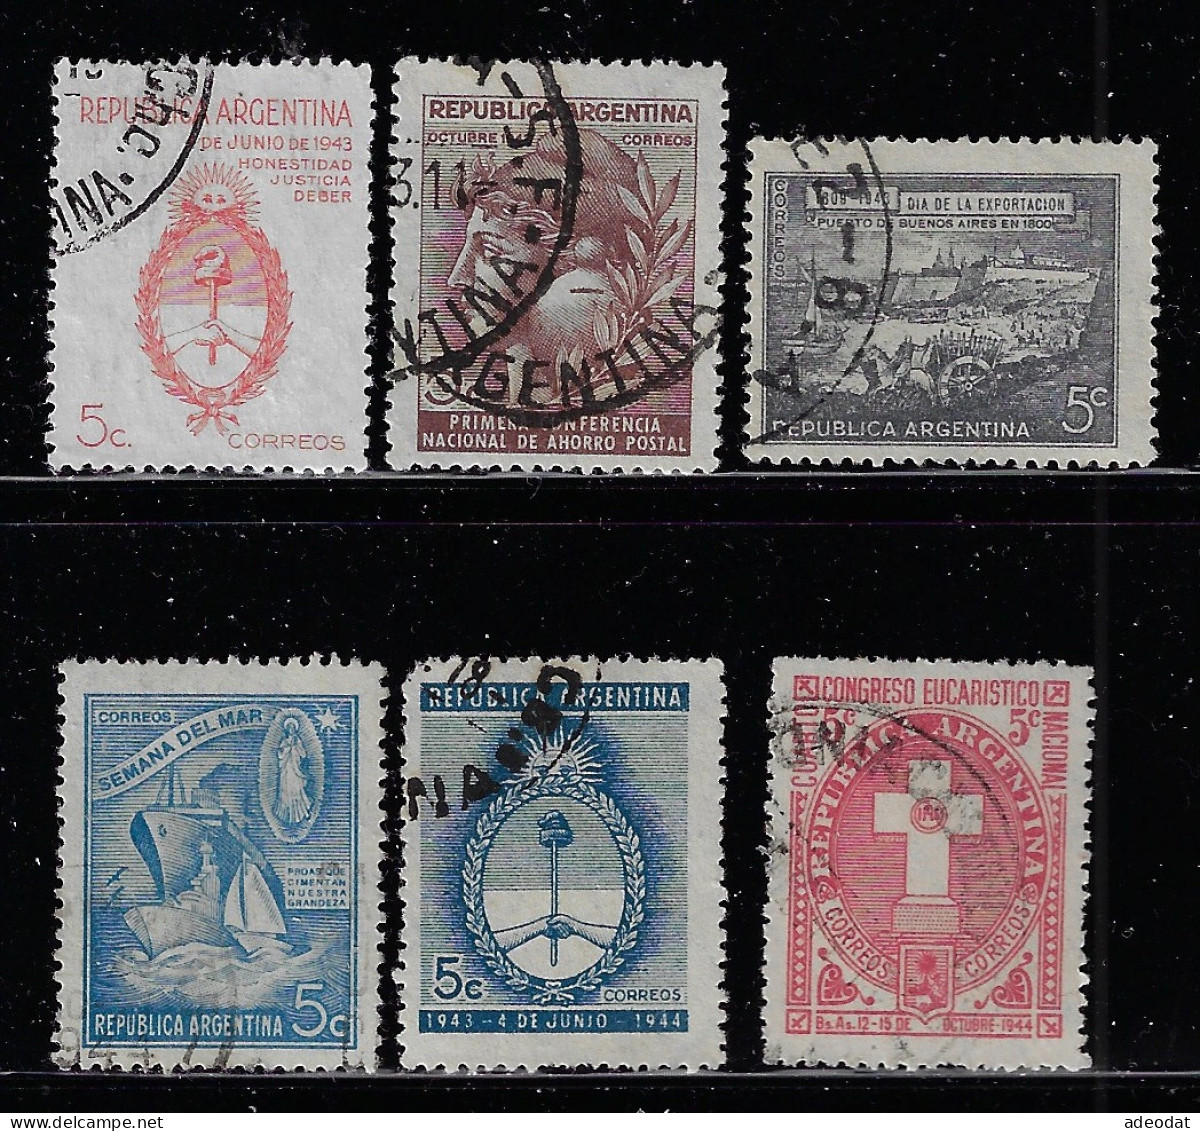 ARGENTINA  1943  SCOTT #508,514,516-518,520  USED - Used Stamps